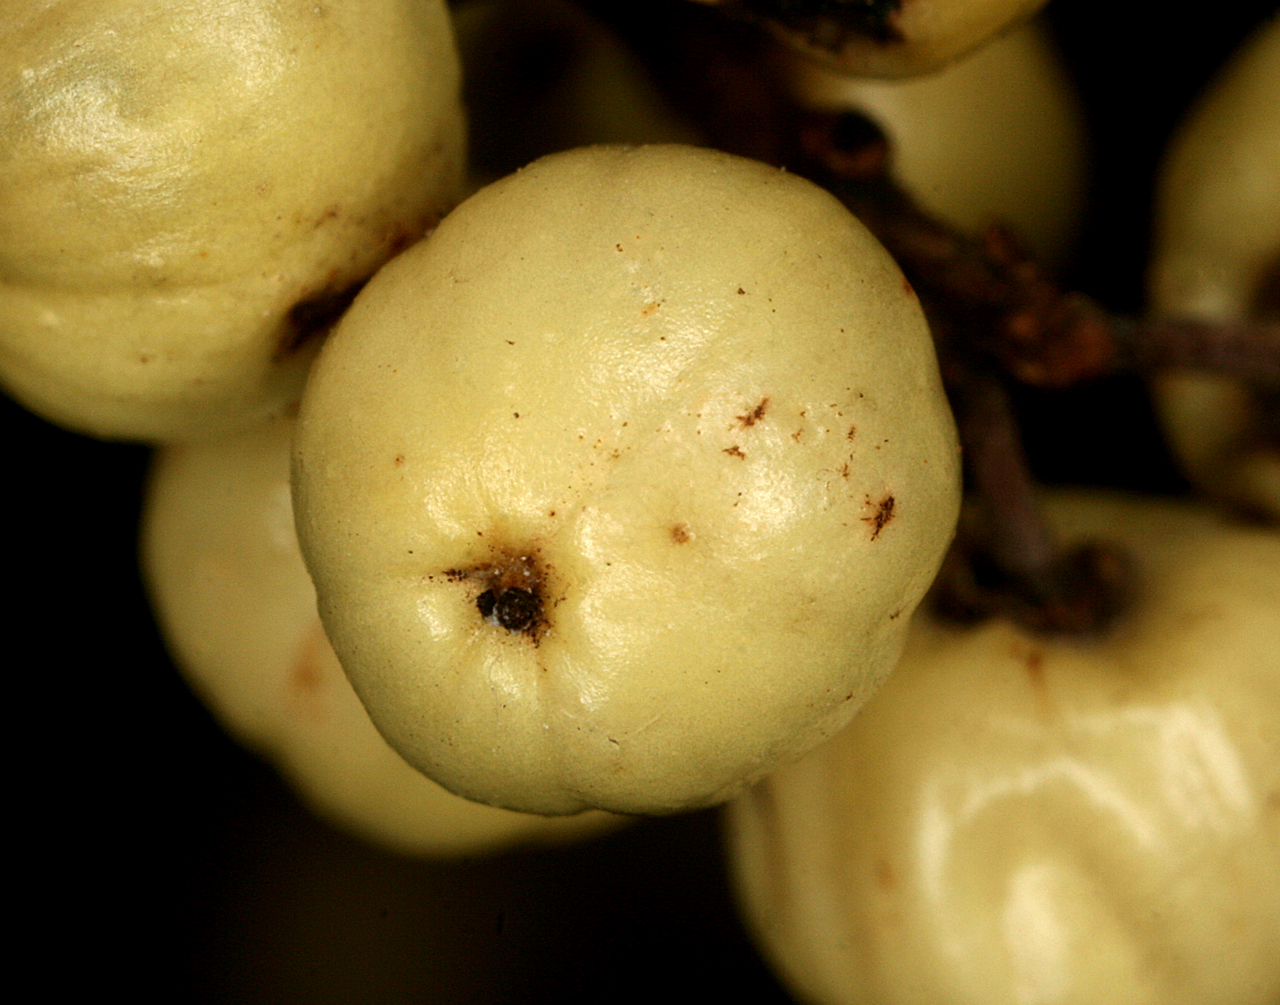 Close-up of fruits, which are a yellowish-white